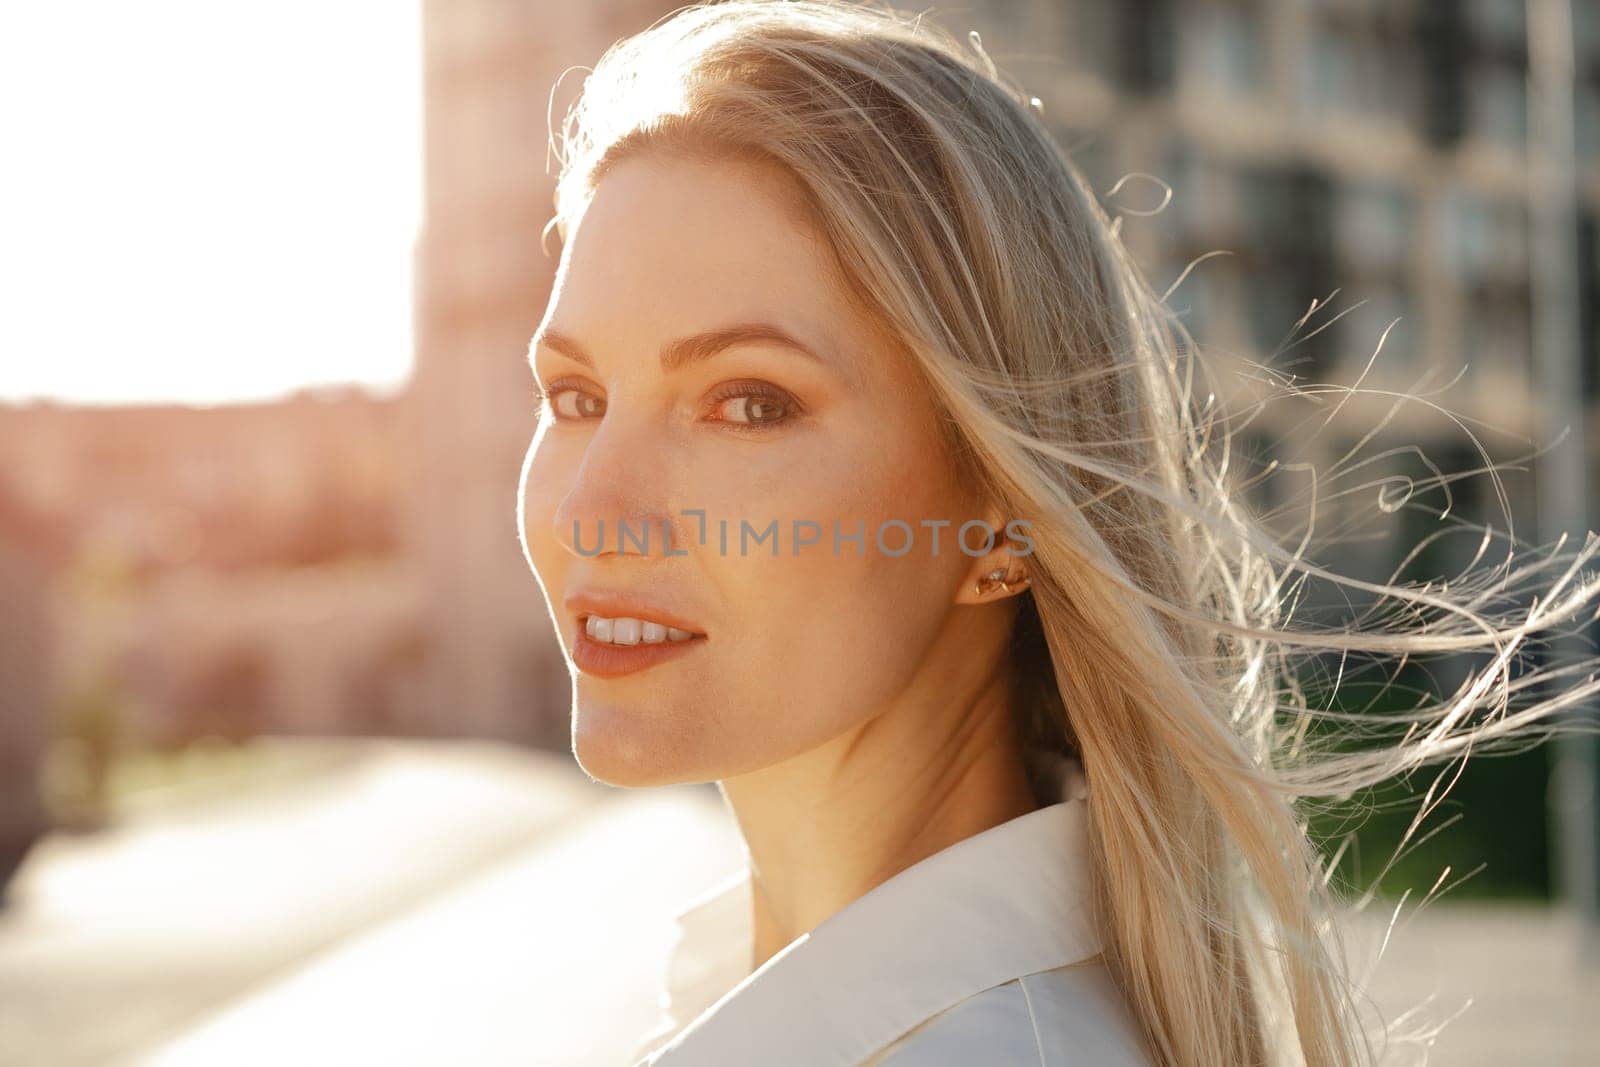 Close up portrait of young businesswoman outdoors by Fabrikasimf